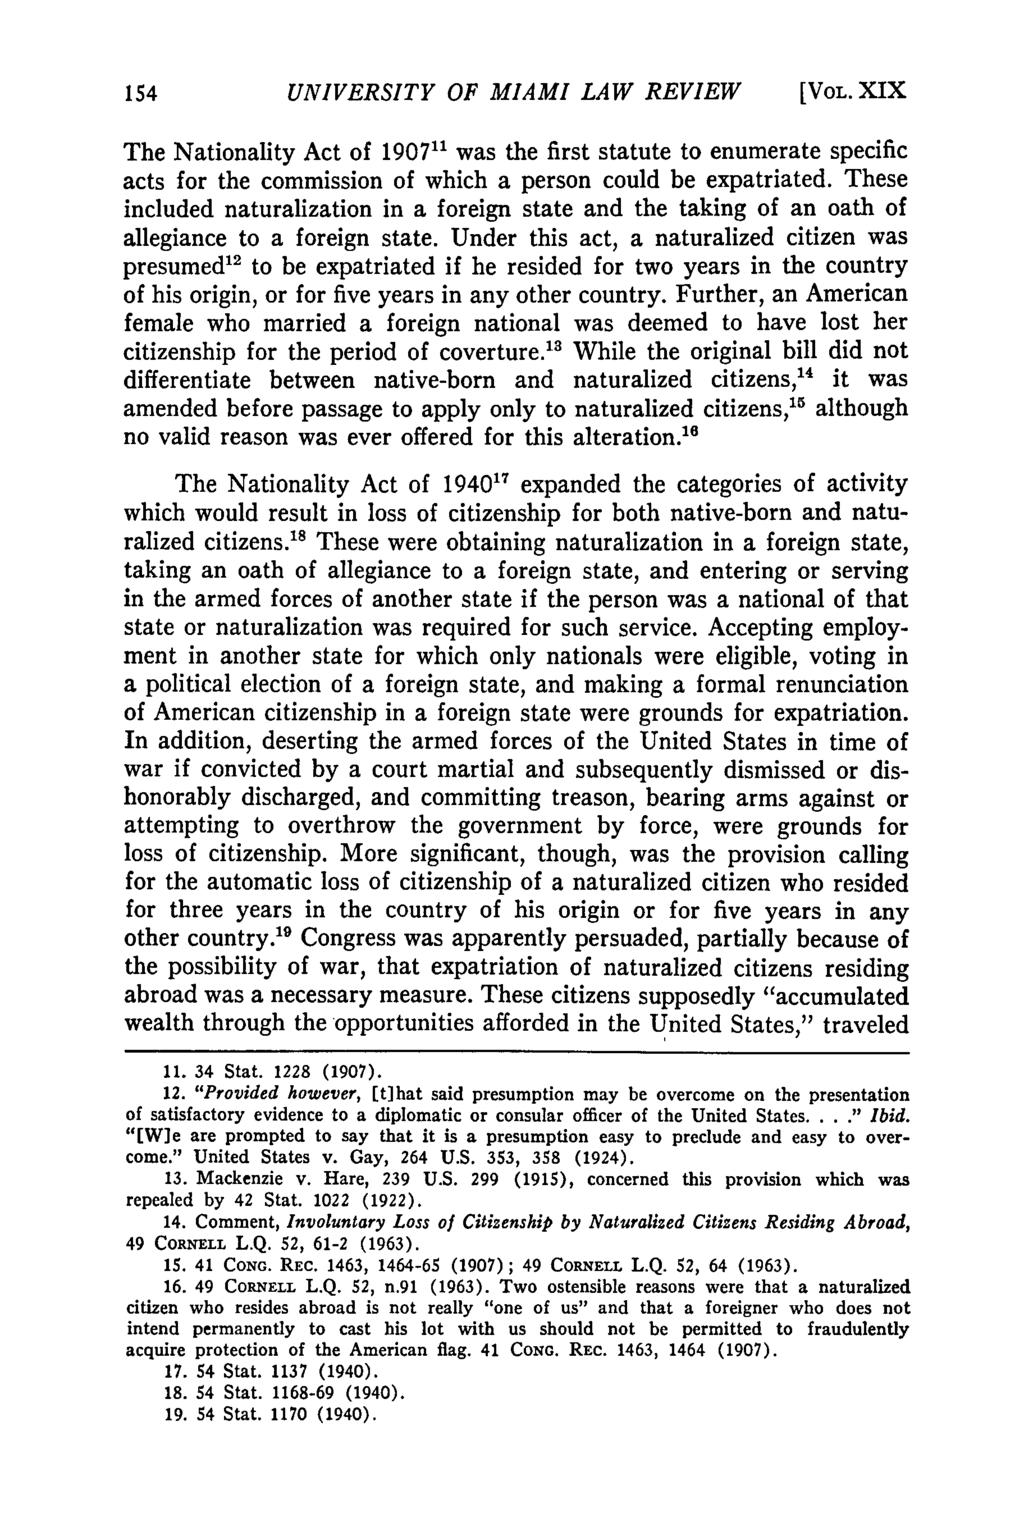 UNIVERSITY OF MIAMI LAW REVIEW [VOL. XIX The Nationality Act of 190711 was the first statute to enumerate specific acts for the commission of which a person could be expatriated.